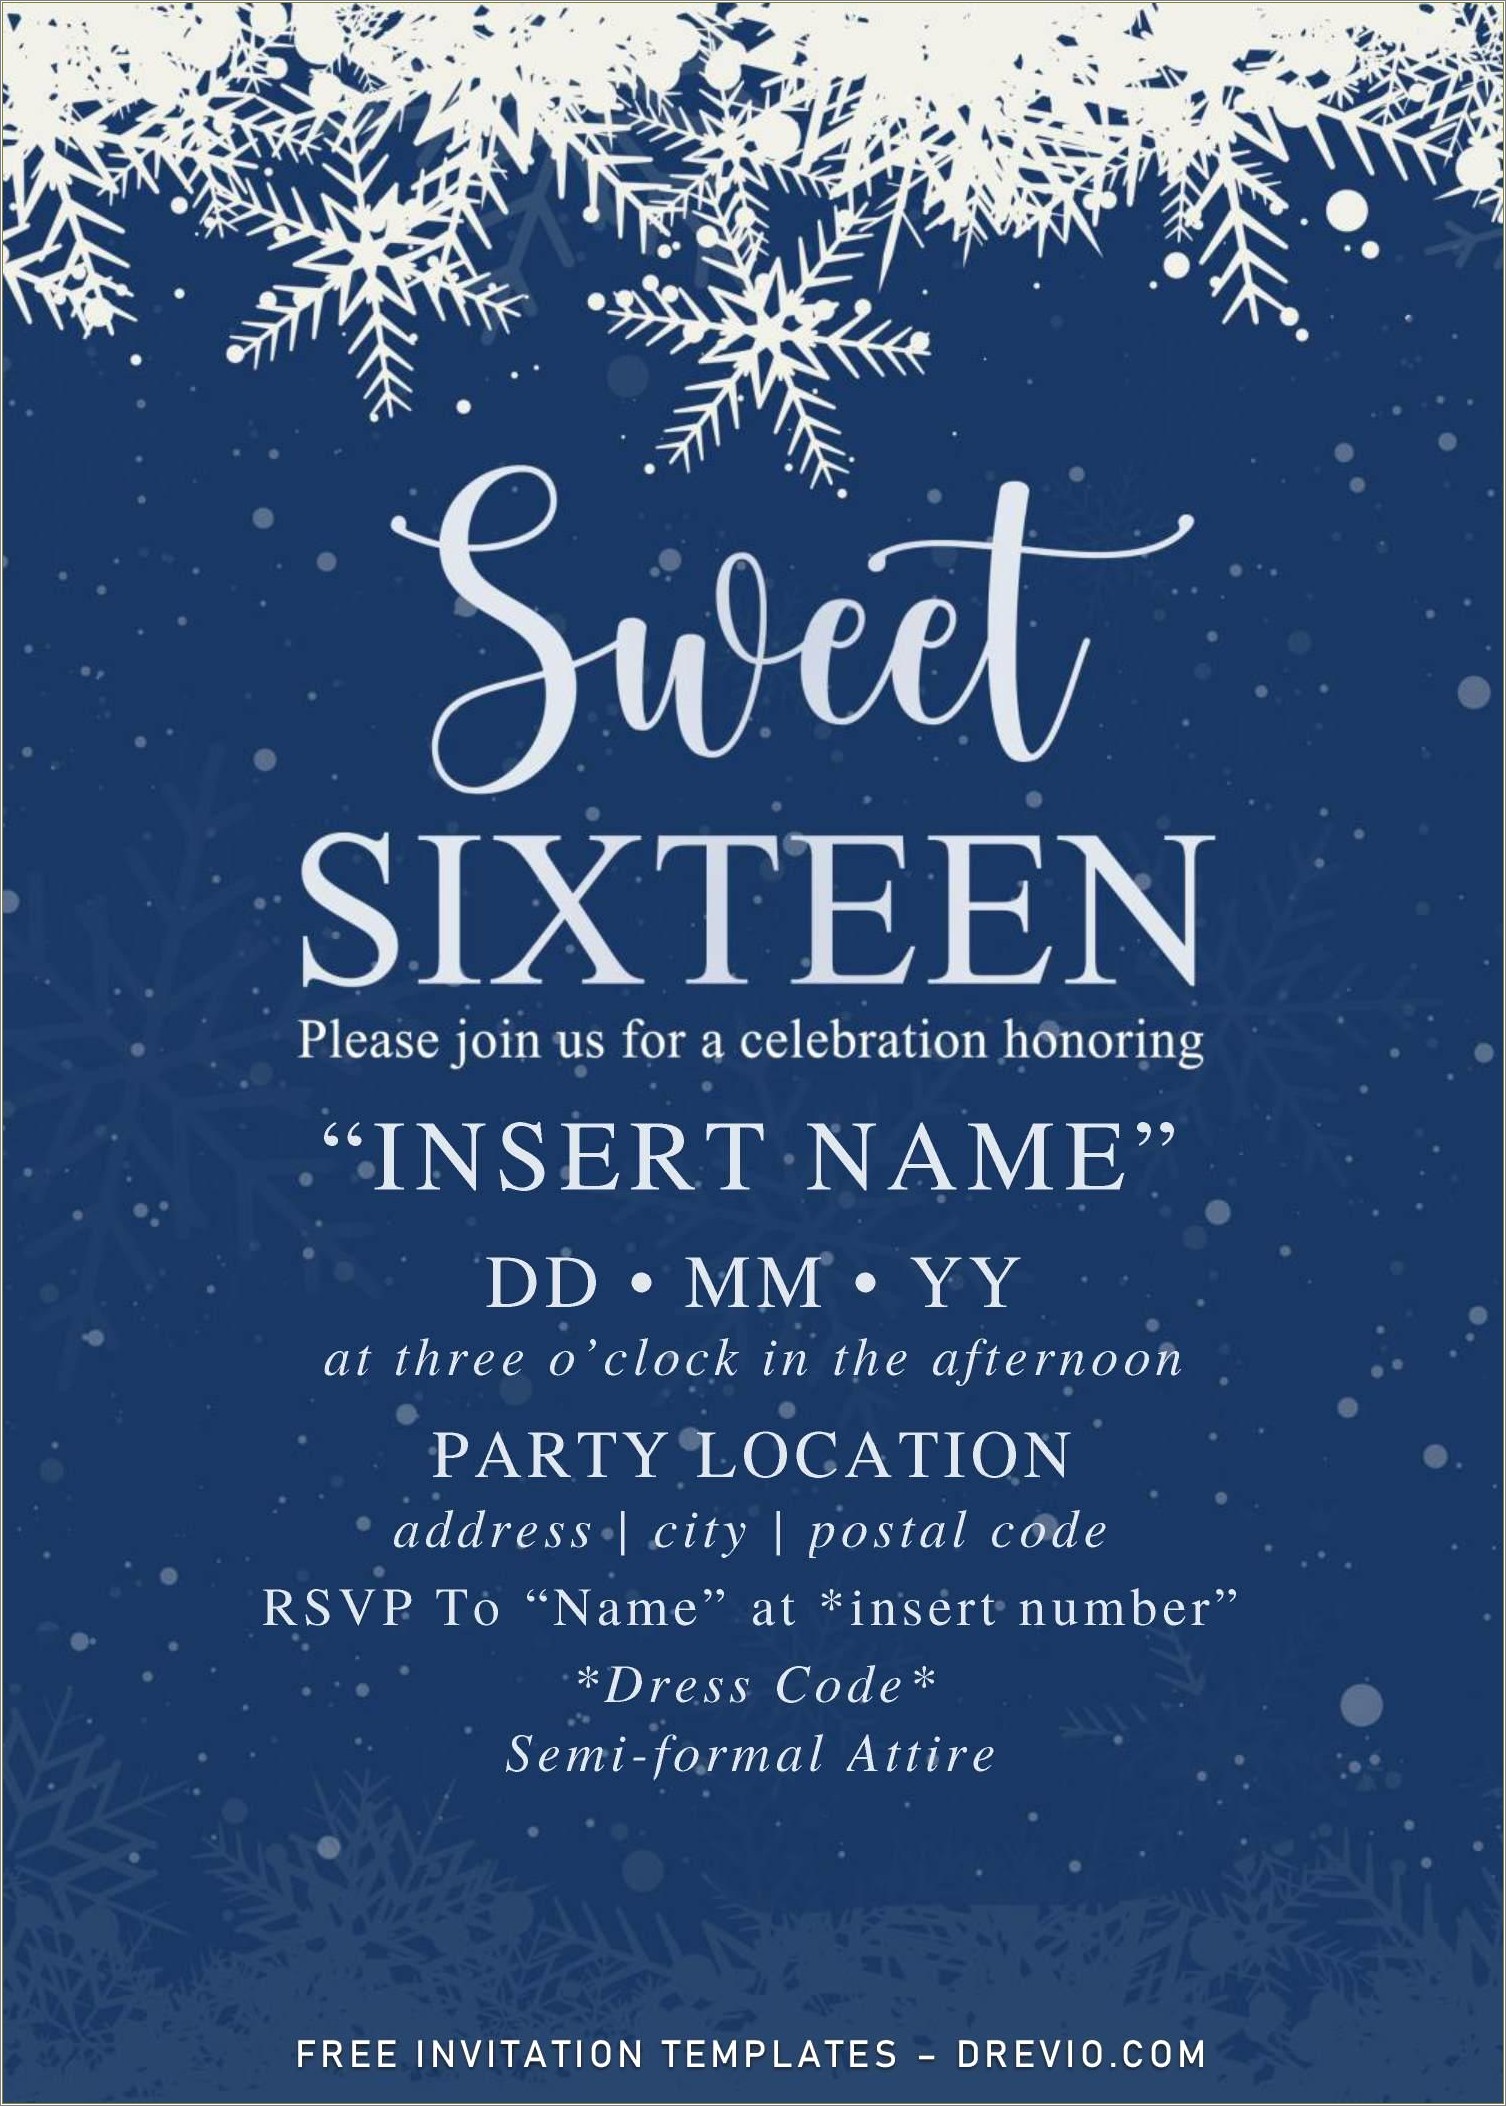 Free Holiday Invitation Template Blue And White